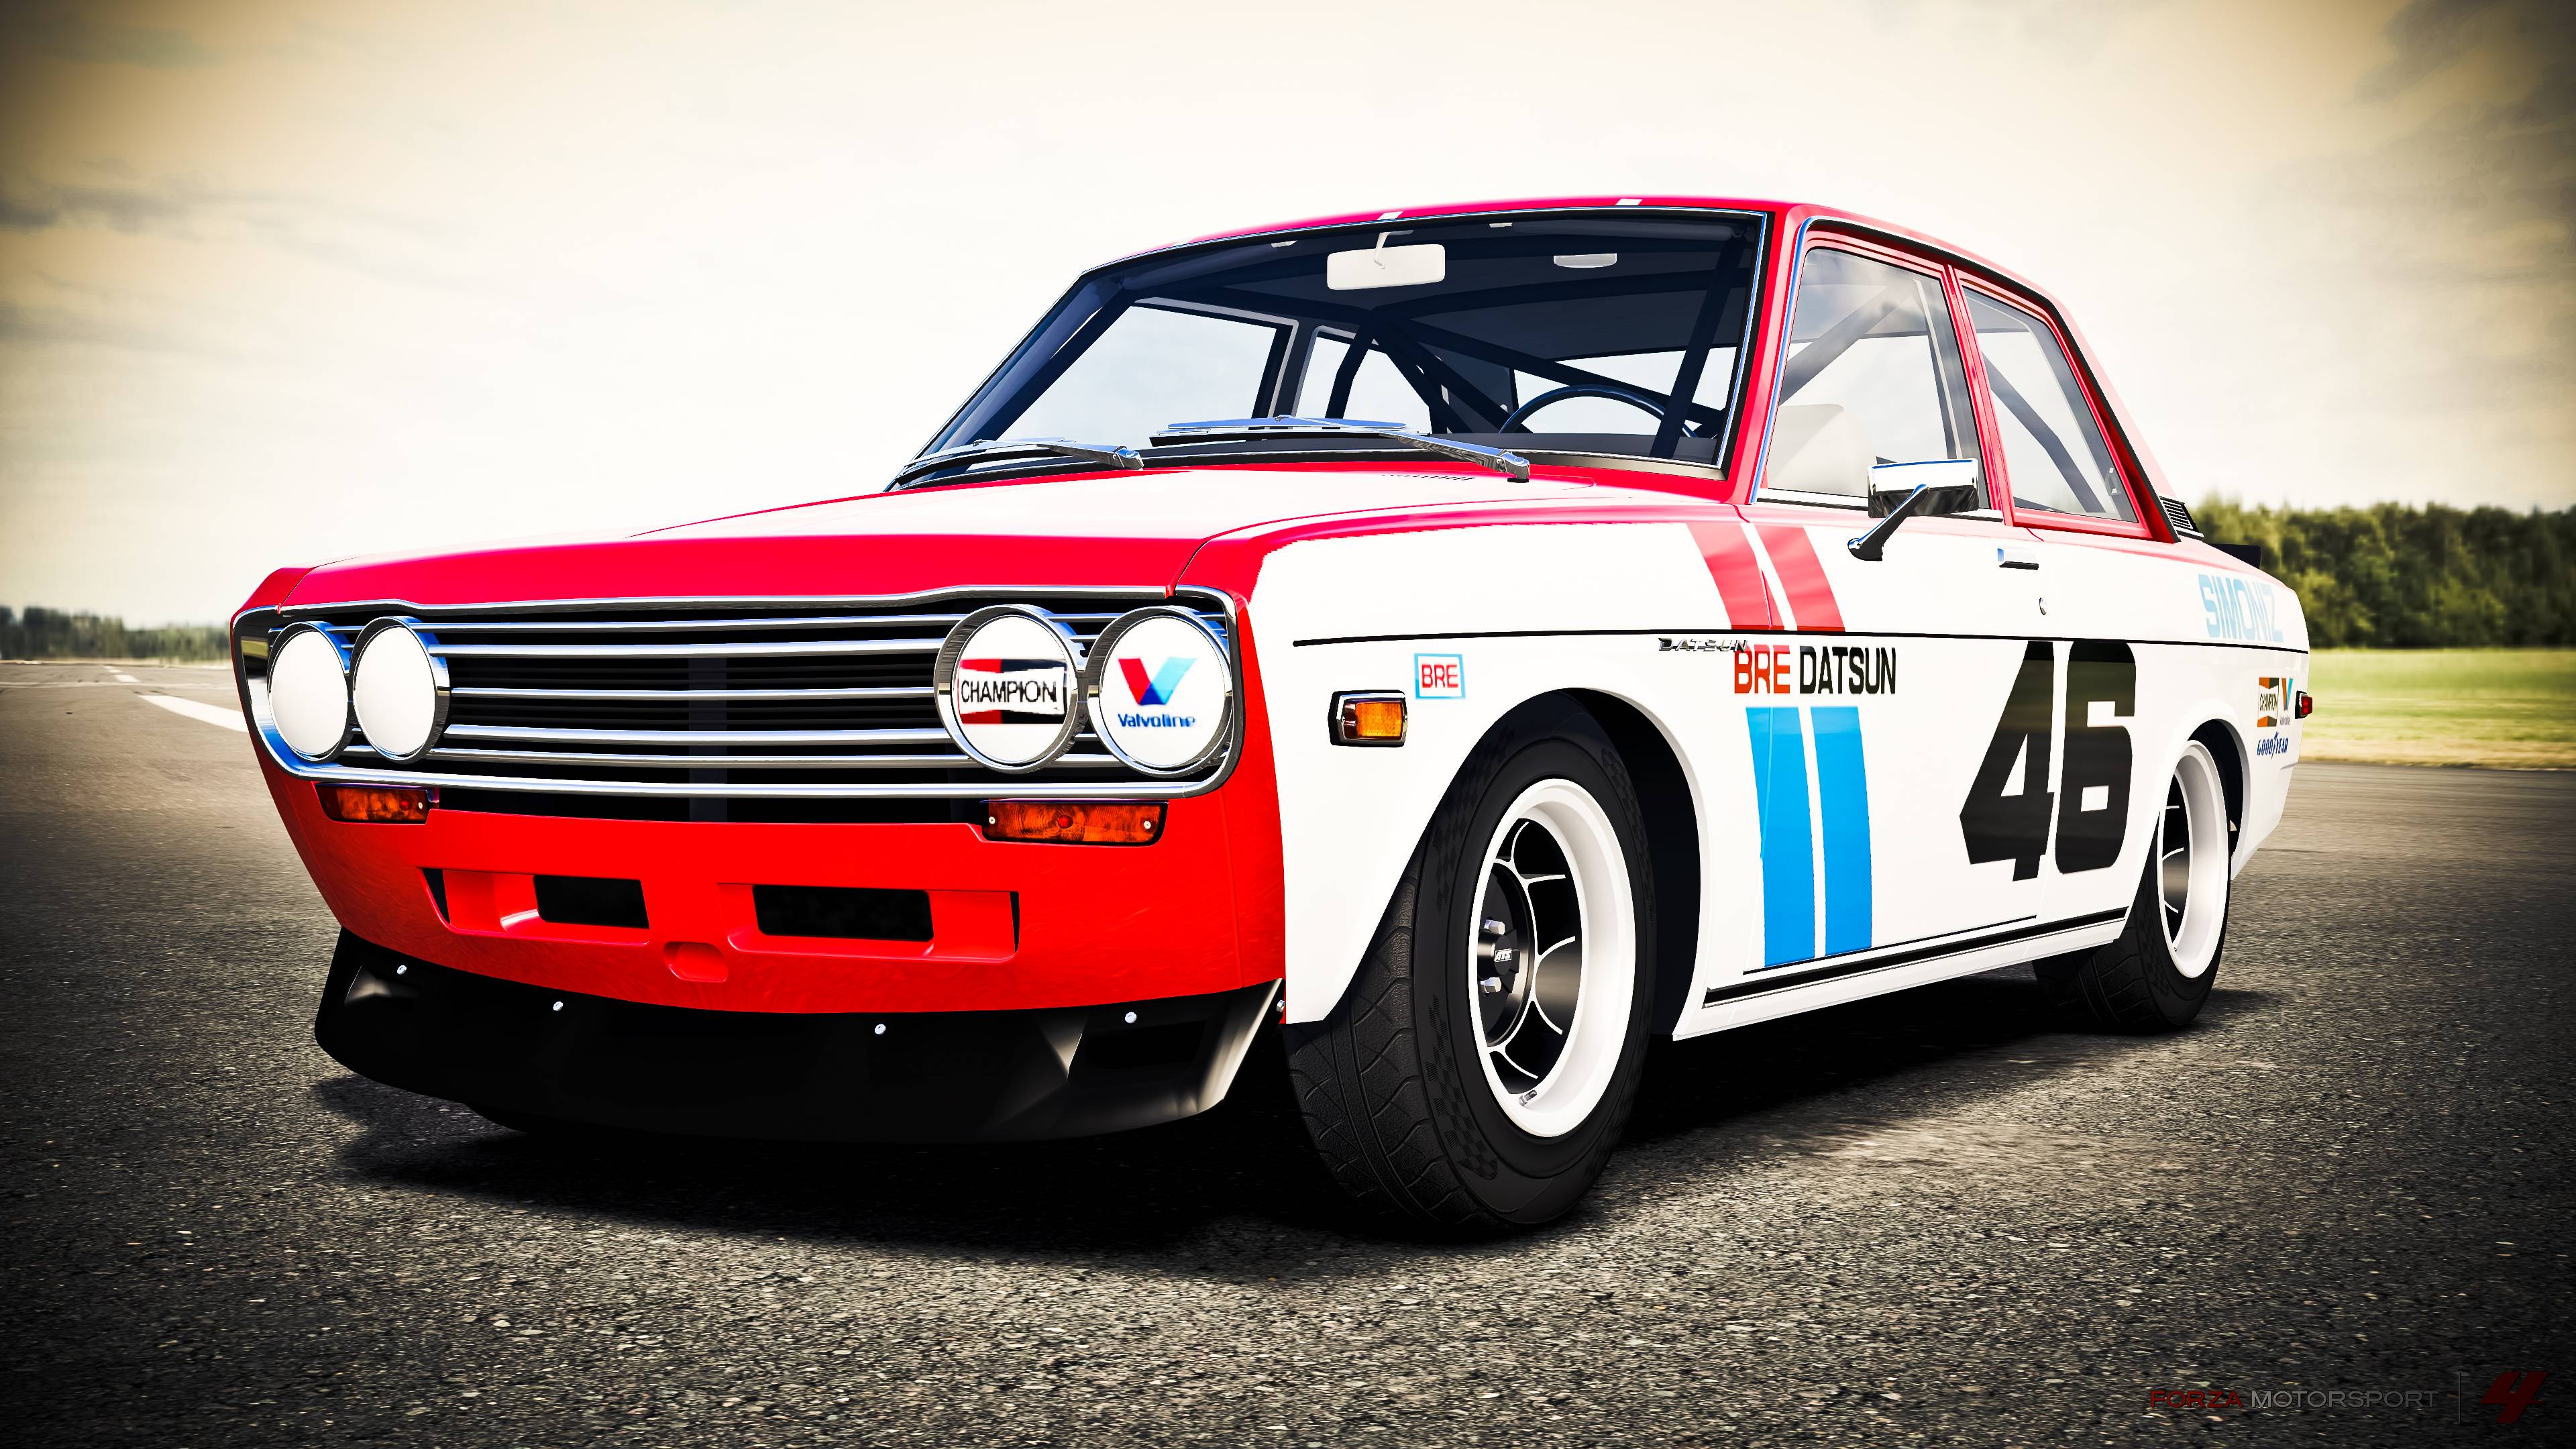 Datsun 510 Image. Picture and Videos